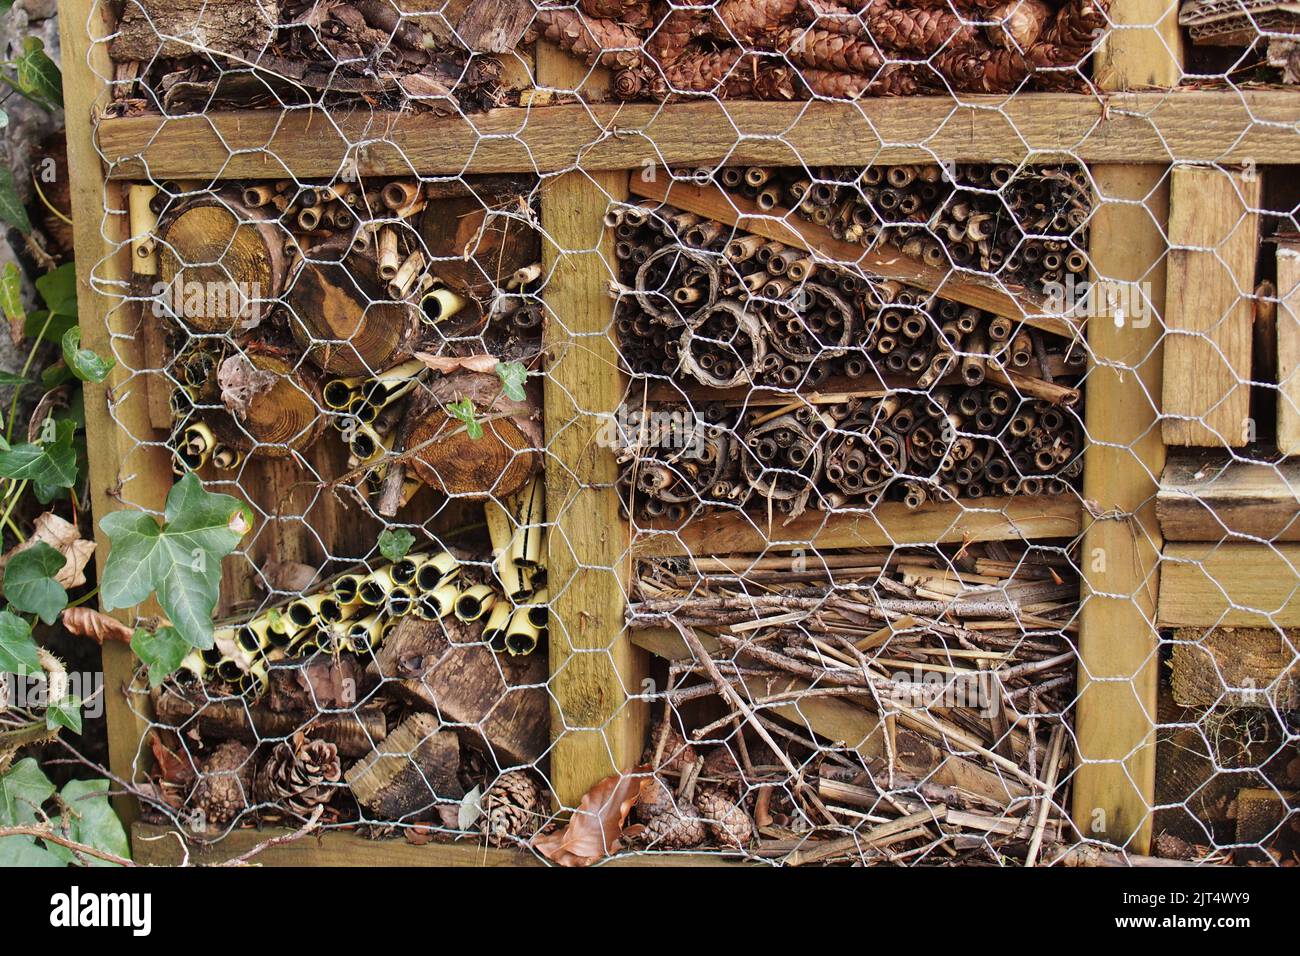 Image of large size bee hotel in Brandon Country Park garden showing diverse range of materials in use Stock Photo